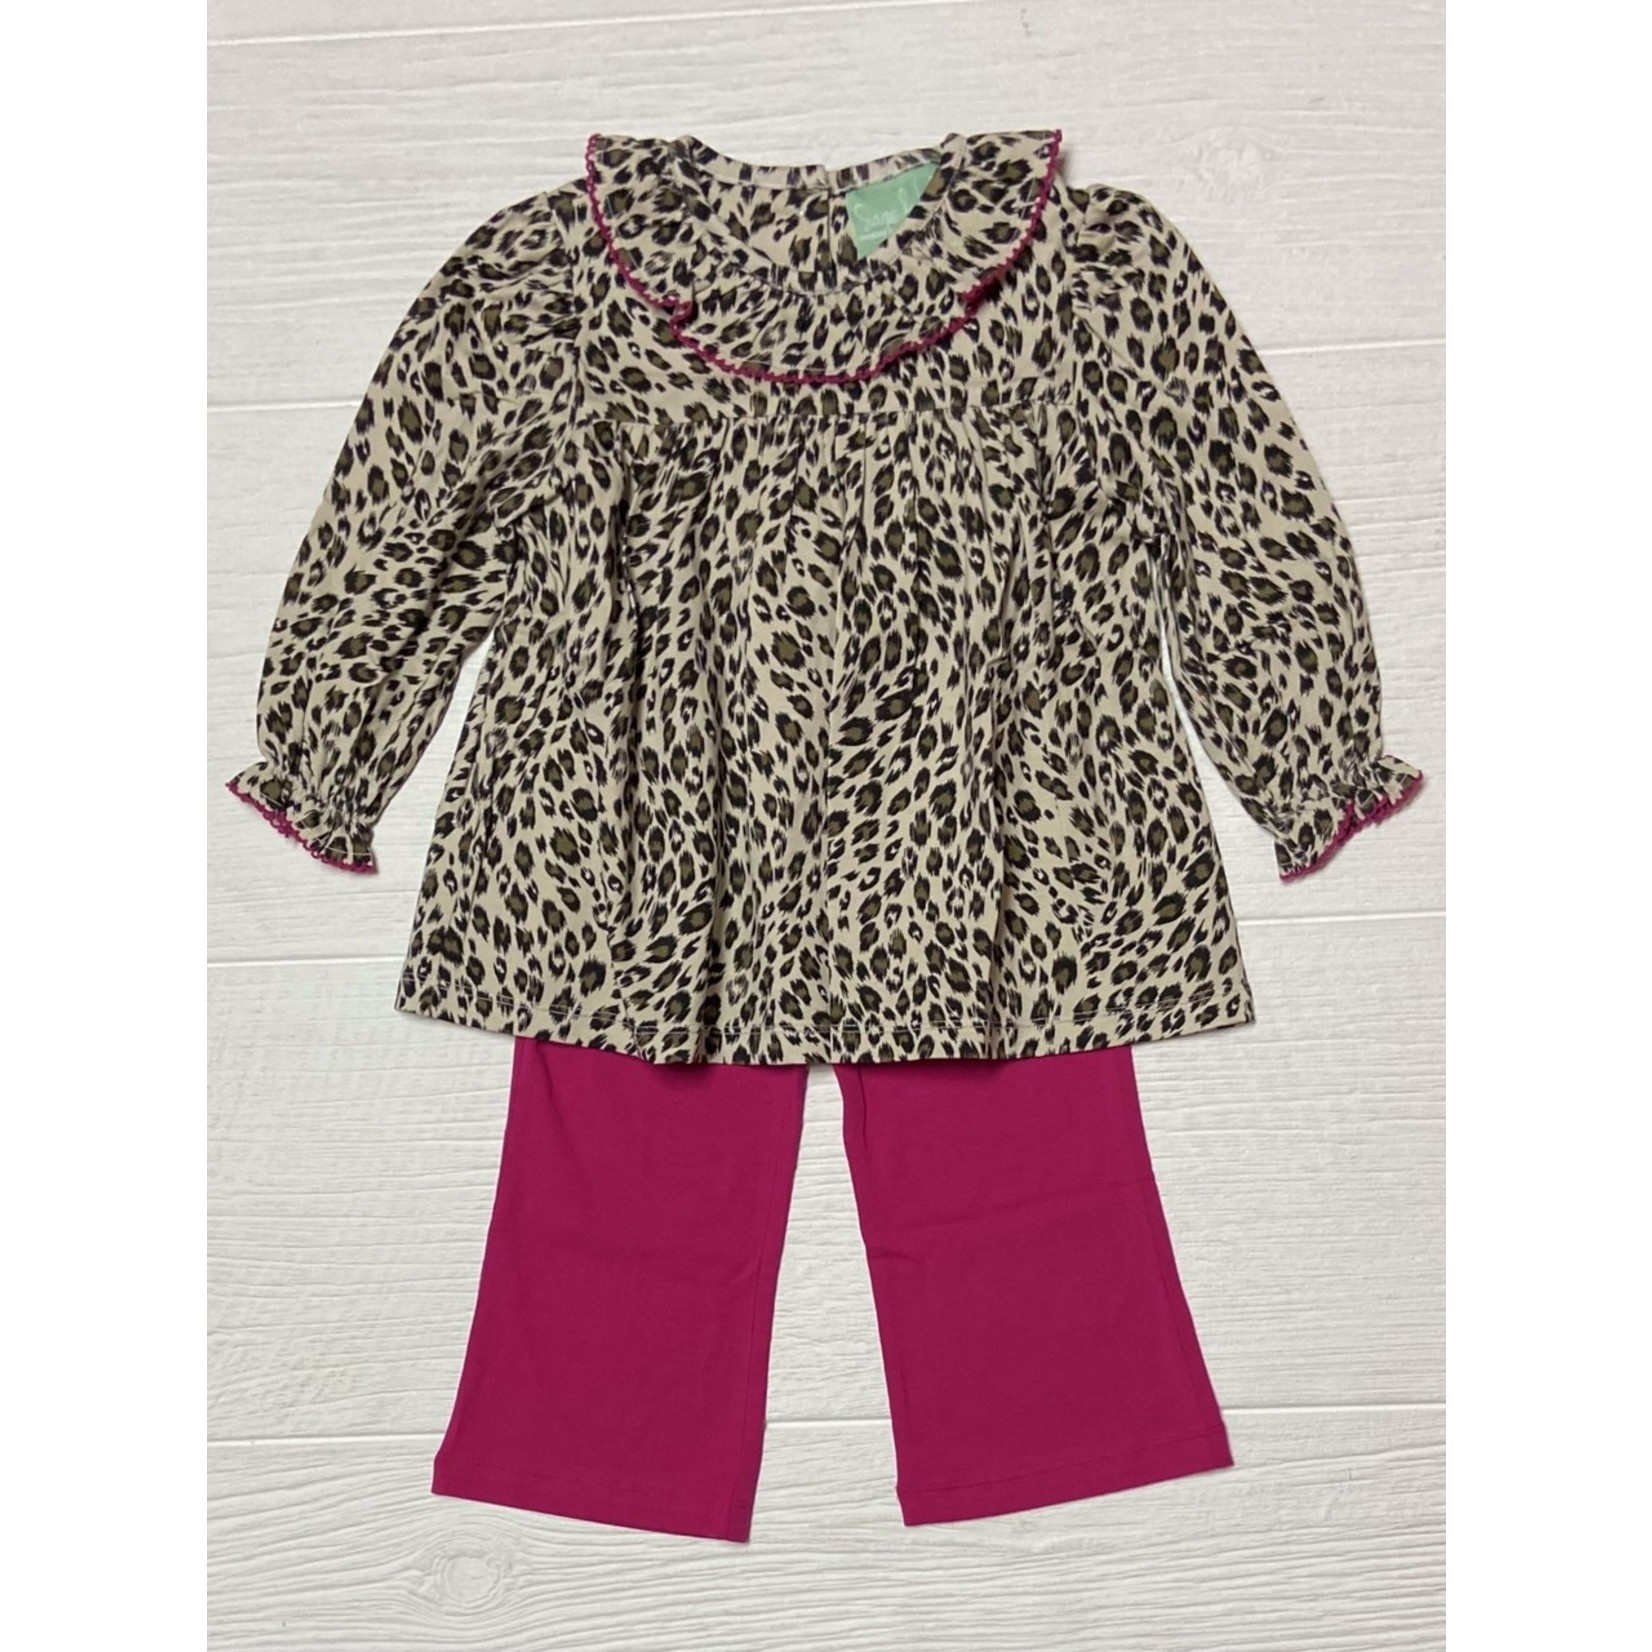 Sage & Lilly Leopard Print Blouse w/Pink Leggings